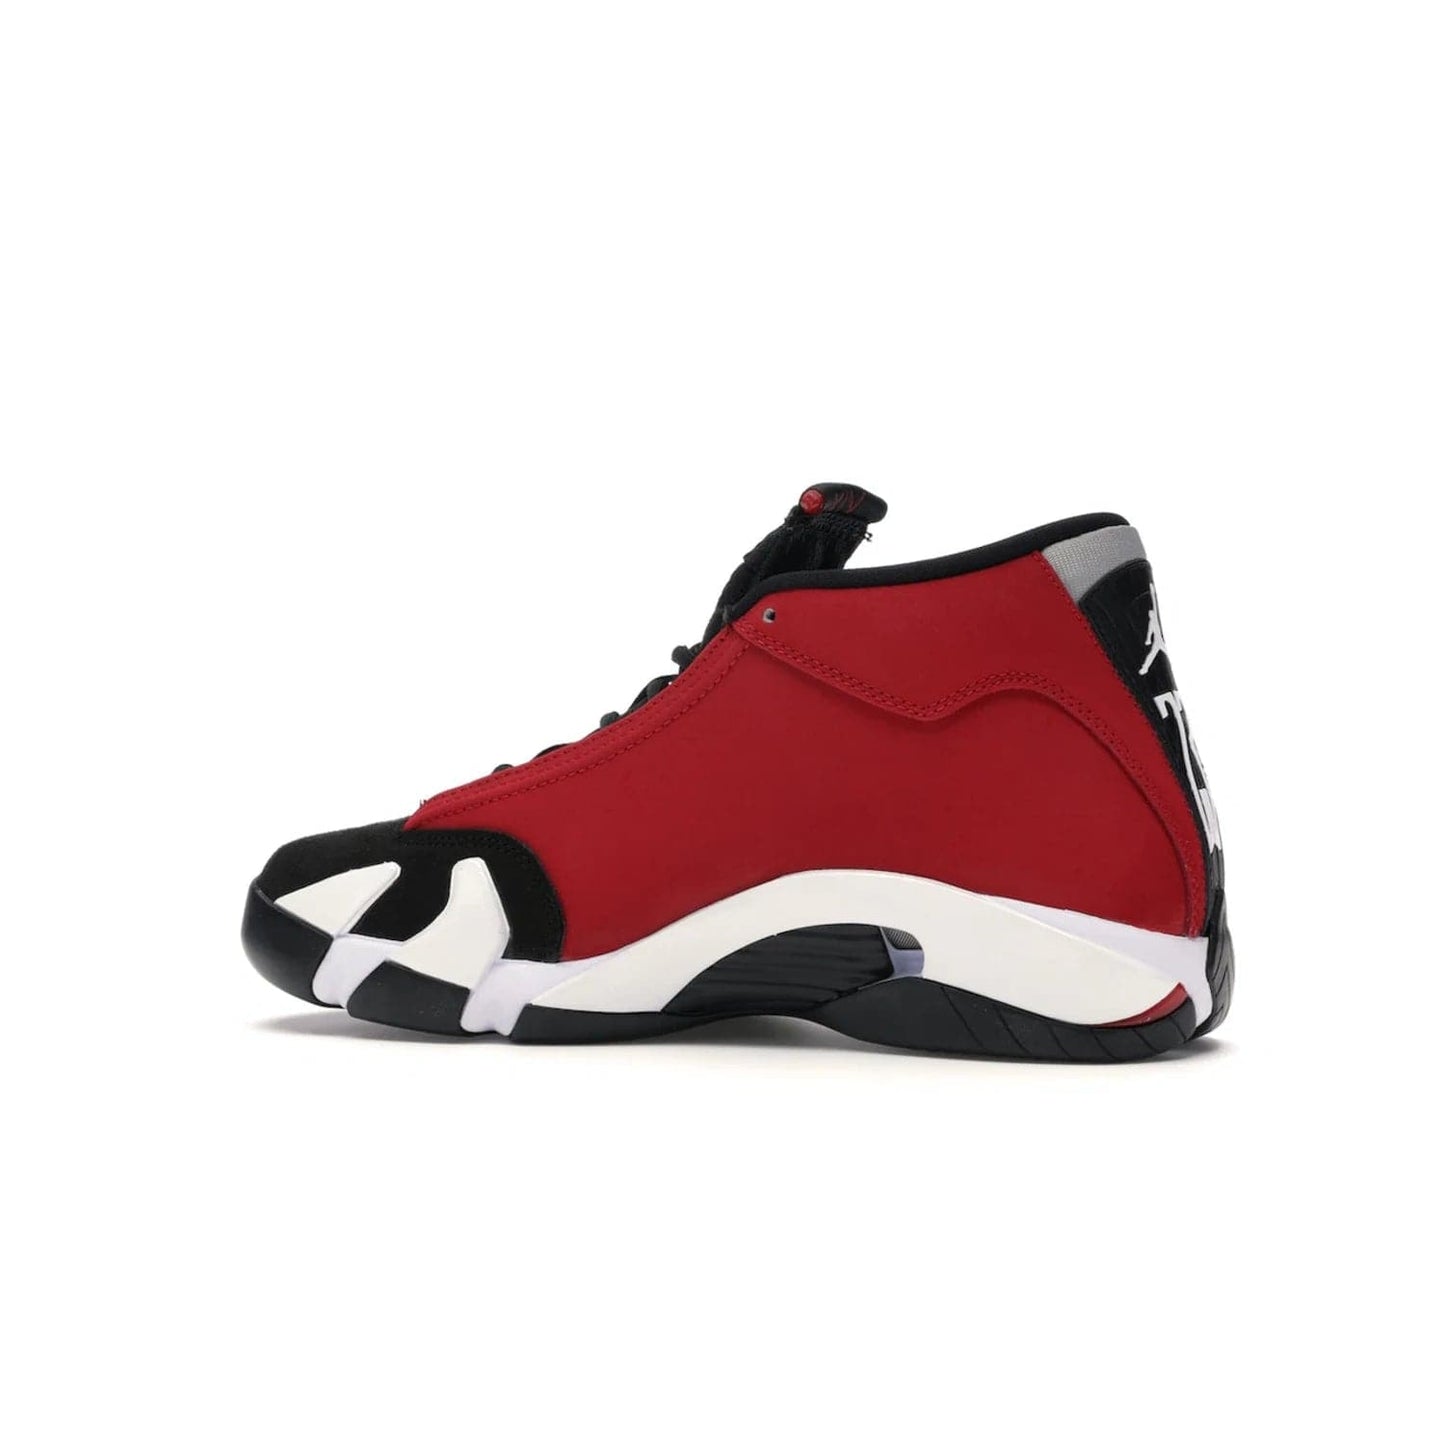 Jordan 14 Retro Gym Red Toro - Image 21 - Only at www.BallersClubKickz.com - Feel the Chicago Bulls energy with the Jordan 14 Retro Gym Red Toro! Black, red, and white design unites performance and fashion. Get your hands on this limited edition Jordan and show off your style today.